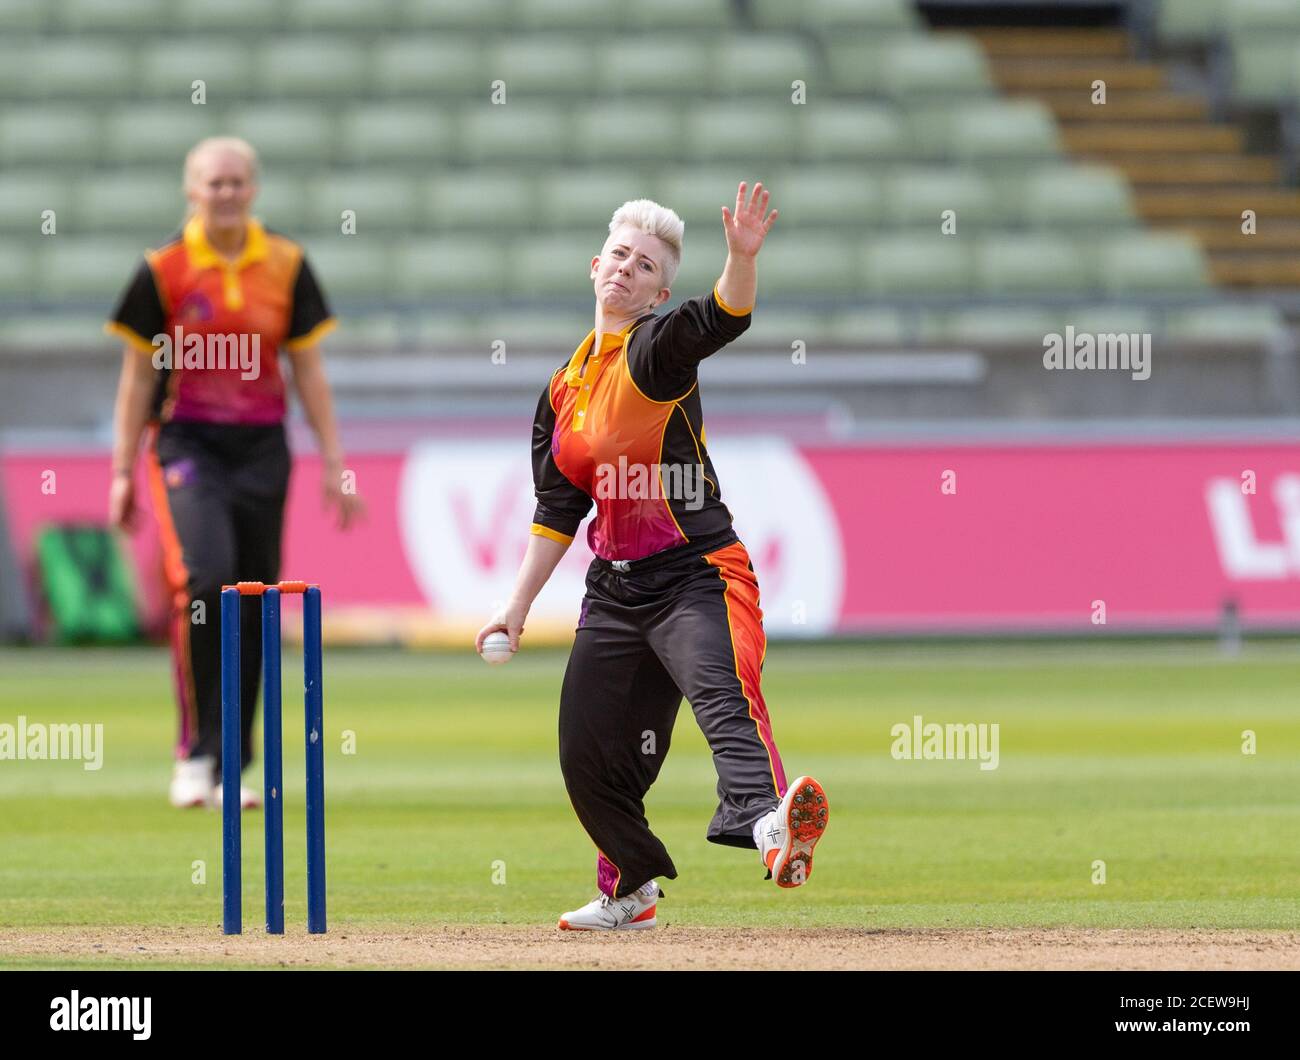 Clare Boycott bowling for Central Sparks against Thunder in a Rachael Heyhoe Flint Trophy match played at Edgbaston Cricket Ground Stock Photo